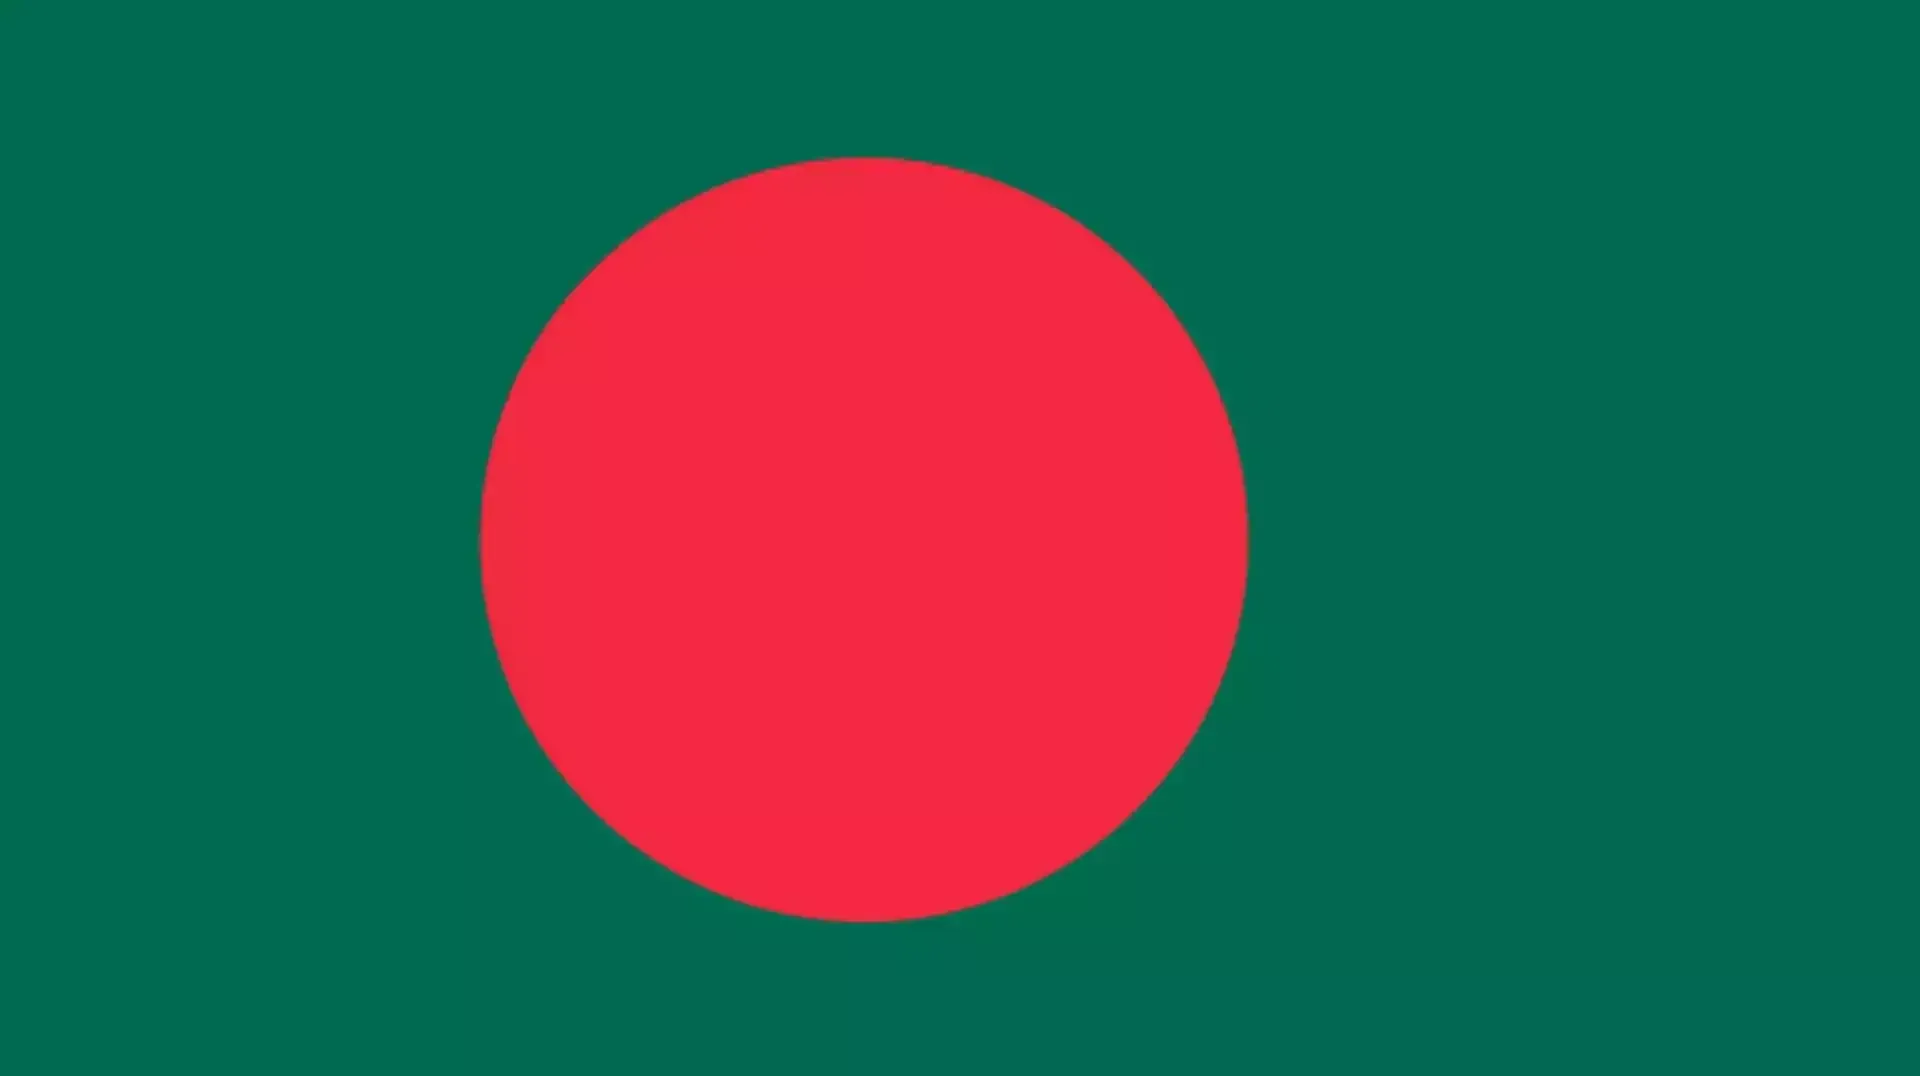 our national flag paragraph | our national flag | paragraph our national flag | our national flag paragraph for class 8 | our national flag paragraph 150 words | our national flag paragraph 300 words | our national flag paragraph for class 8 bangladesh | our national flag paragraph for class 9 bangladesh